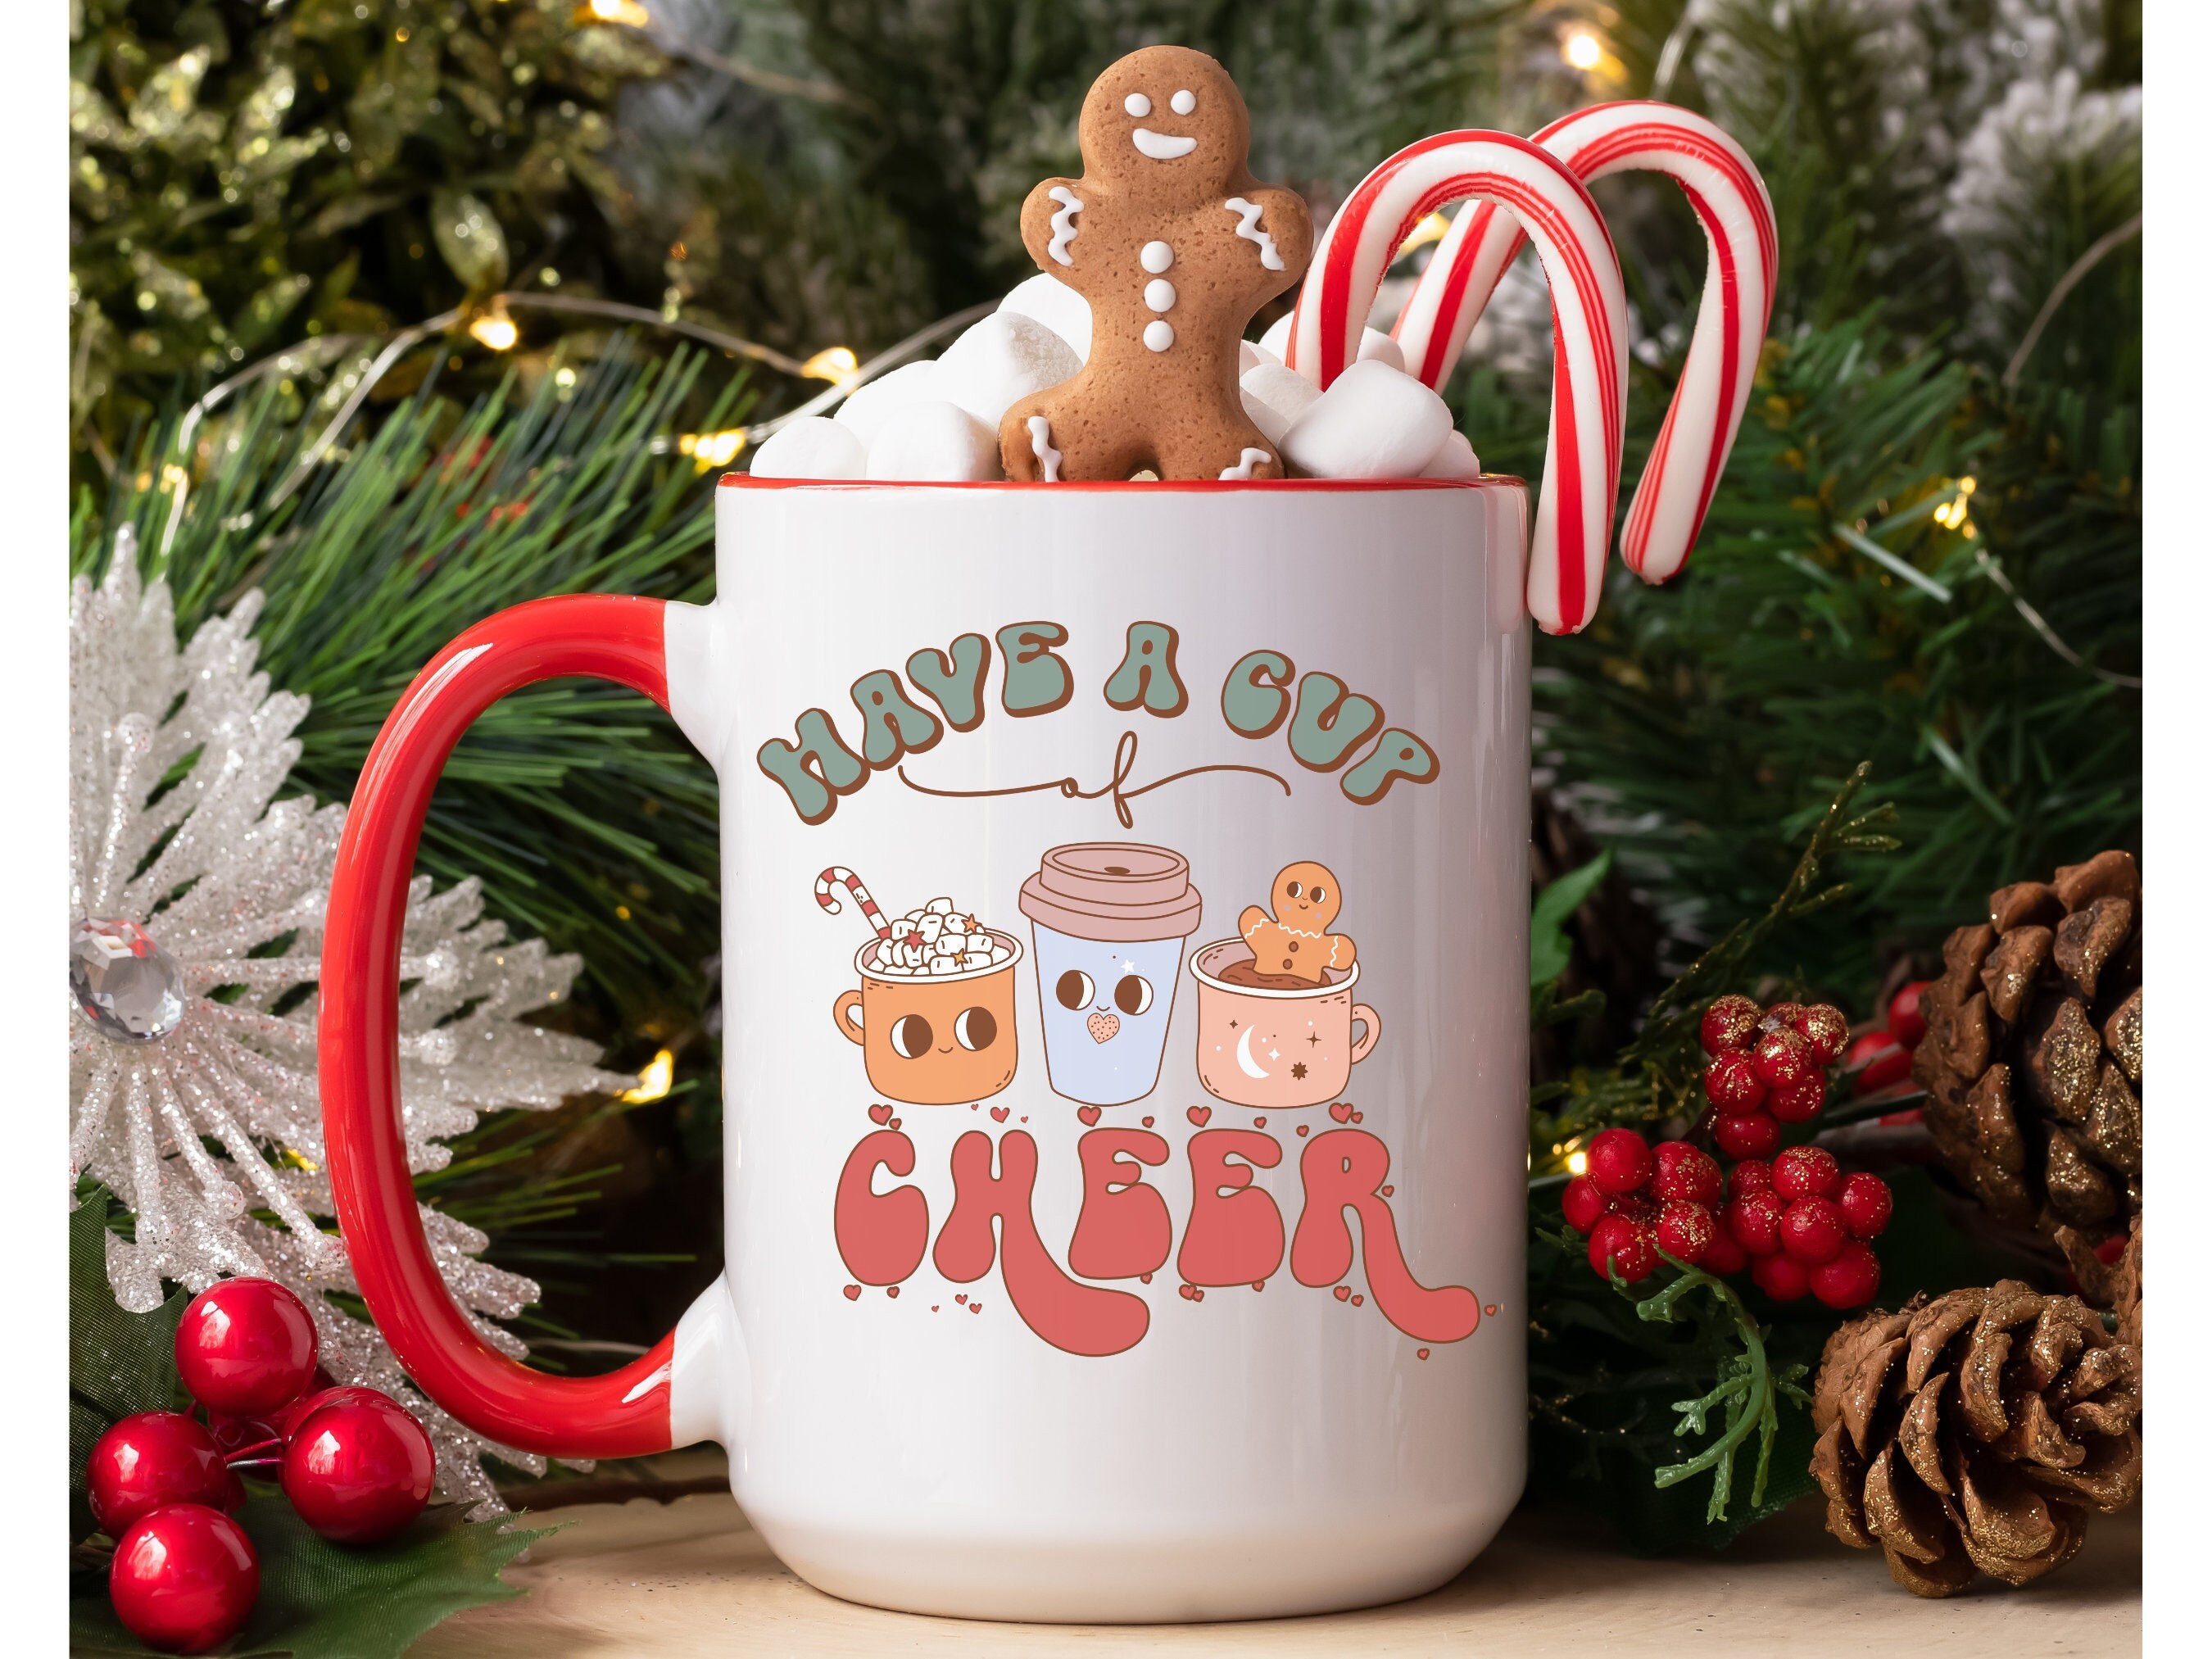 Have A Cup of Cheer Insulated Travel Mug